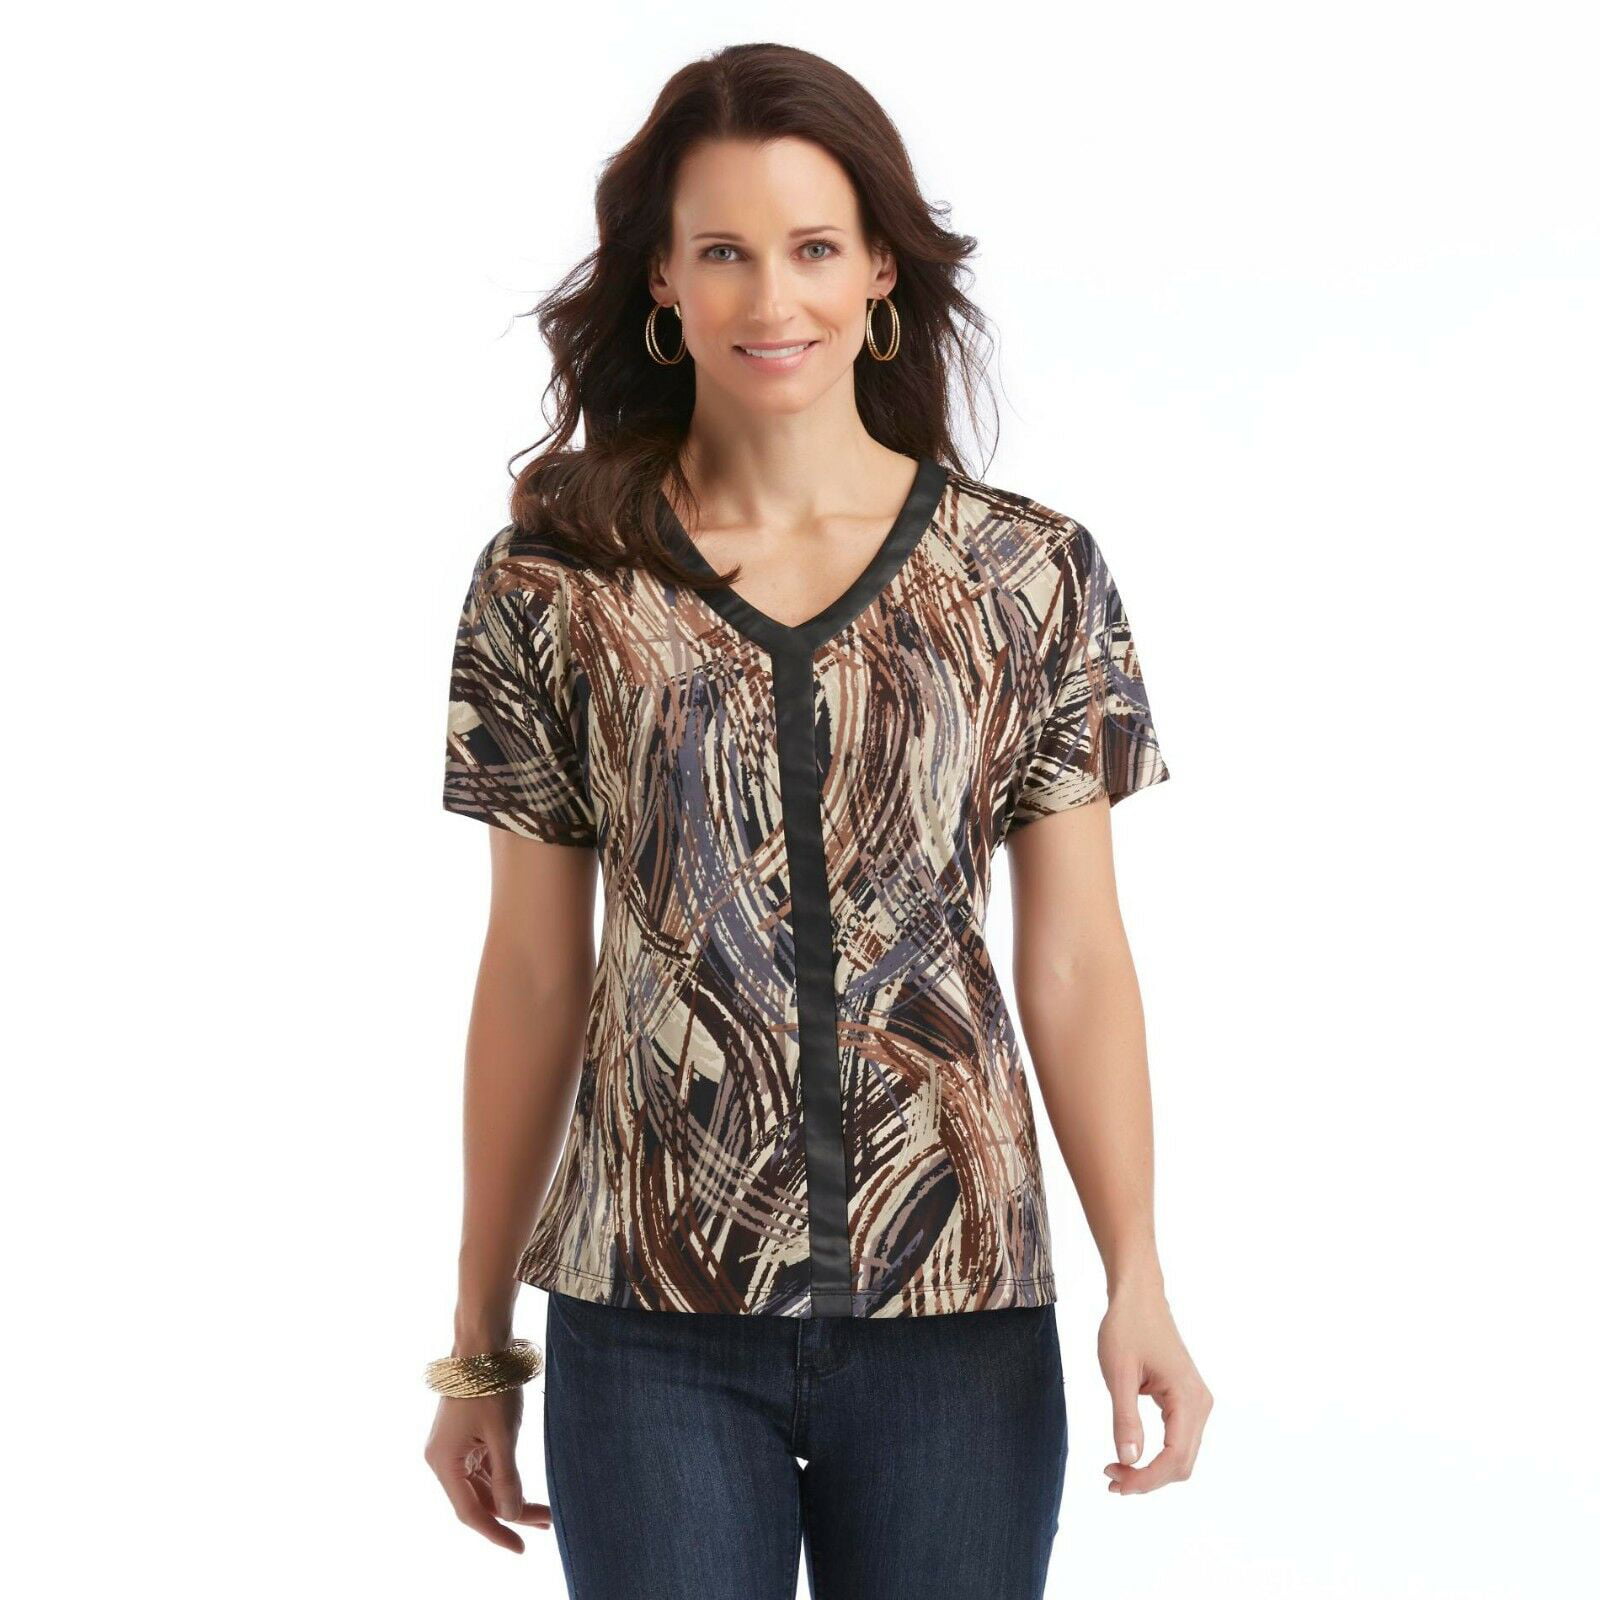 Jaclyn Smith - Jaclyn Smith Womens Top Size XL Knit Top Shirt Blouse ...